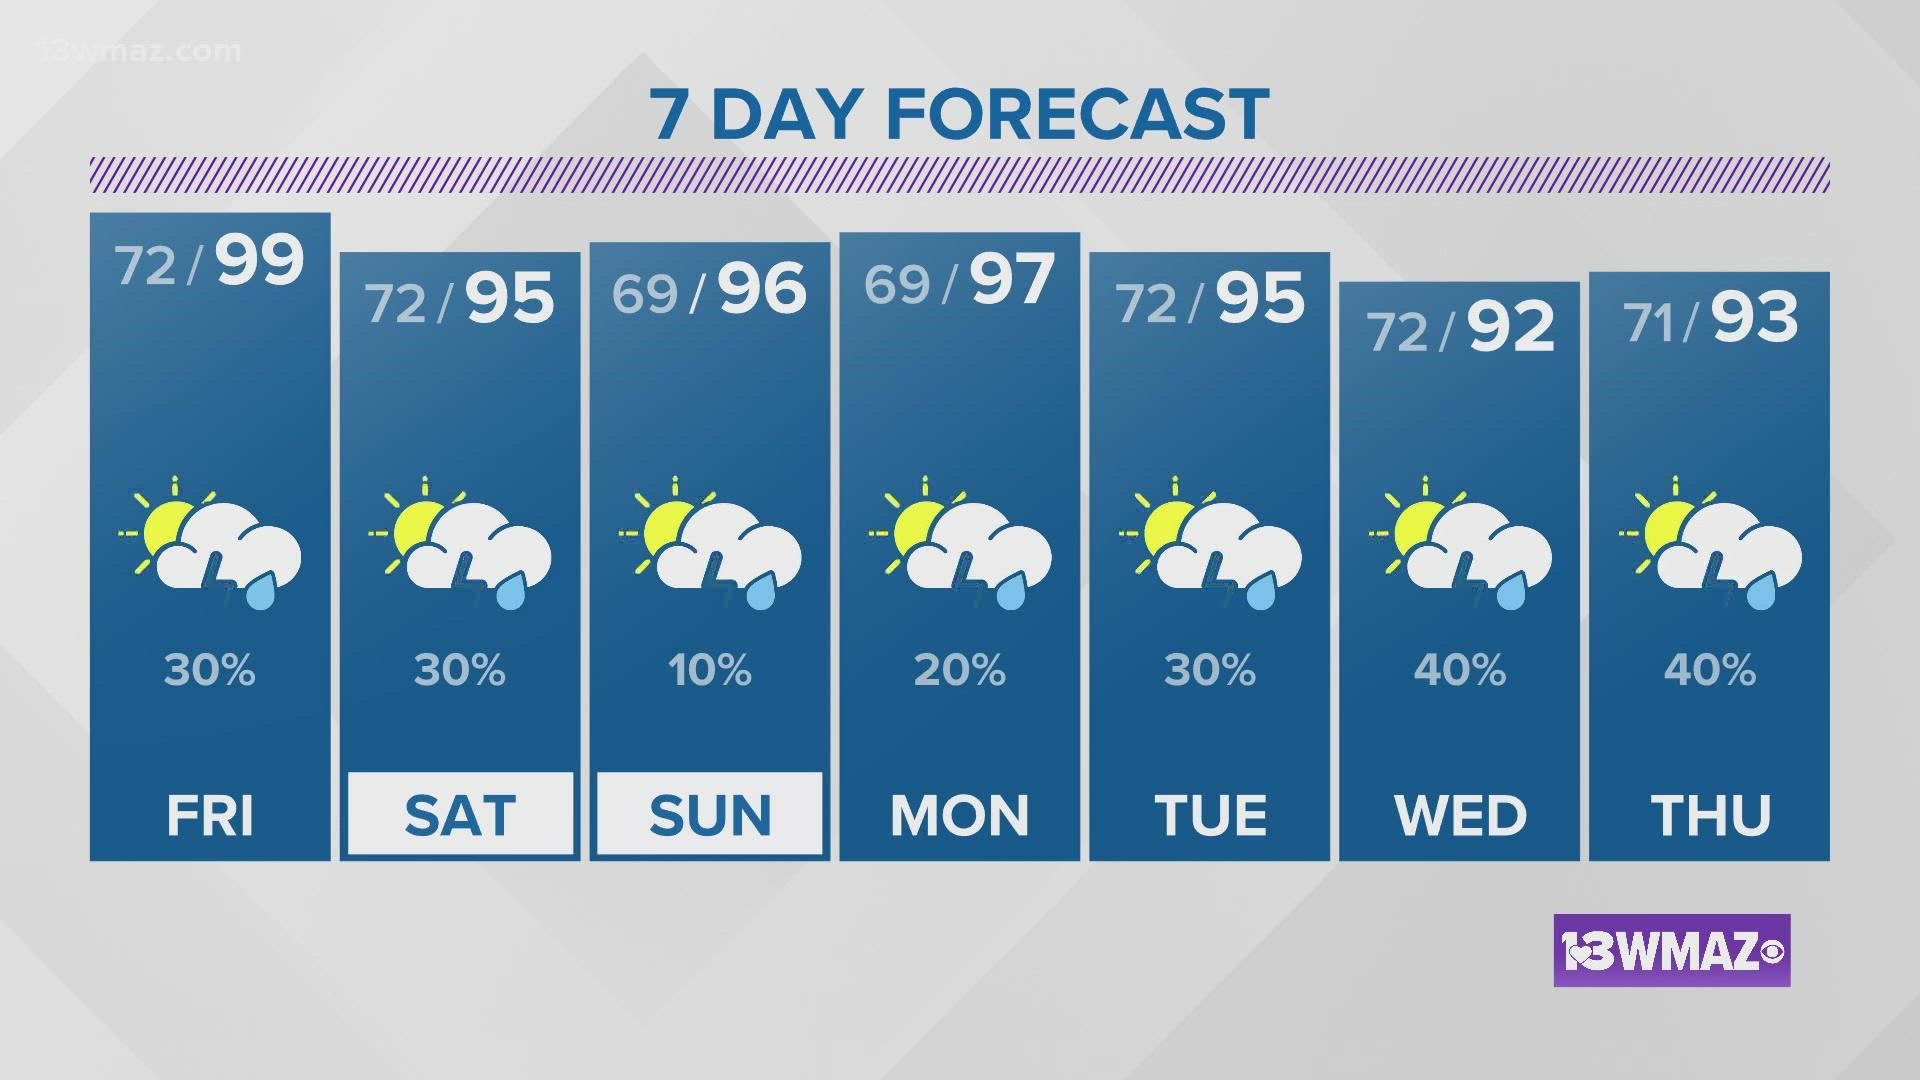 Humidity and heat are rising, and a few spots of rain may pop up in the afternoon.